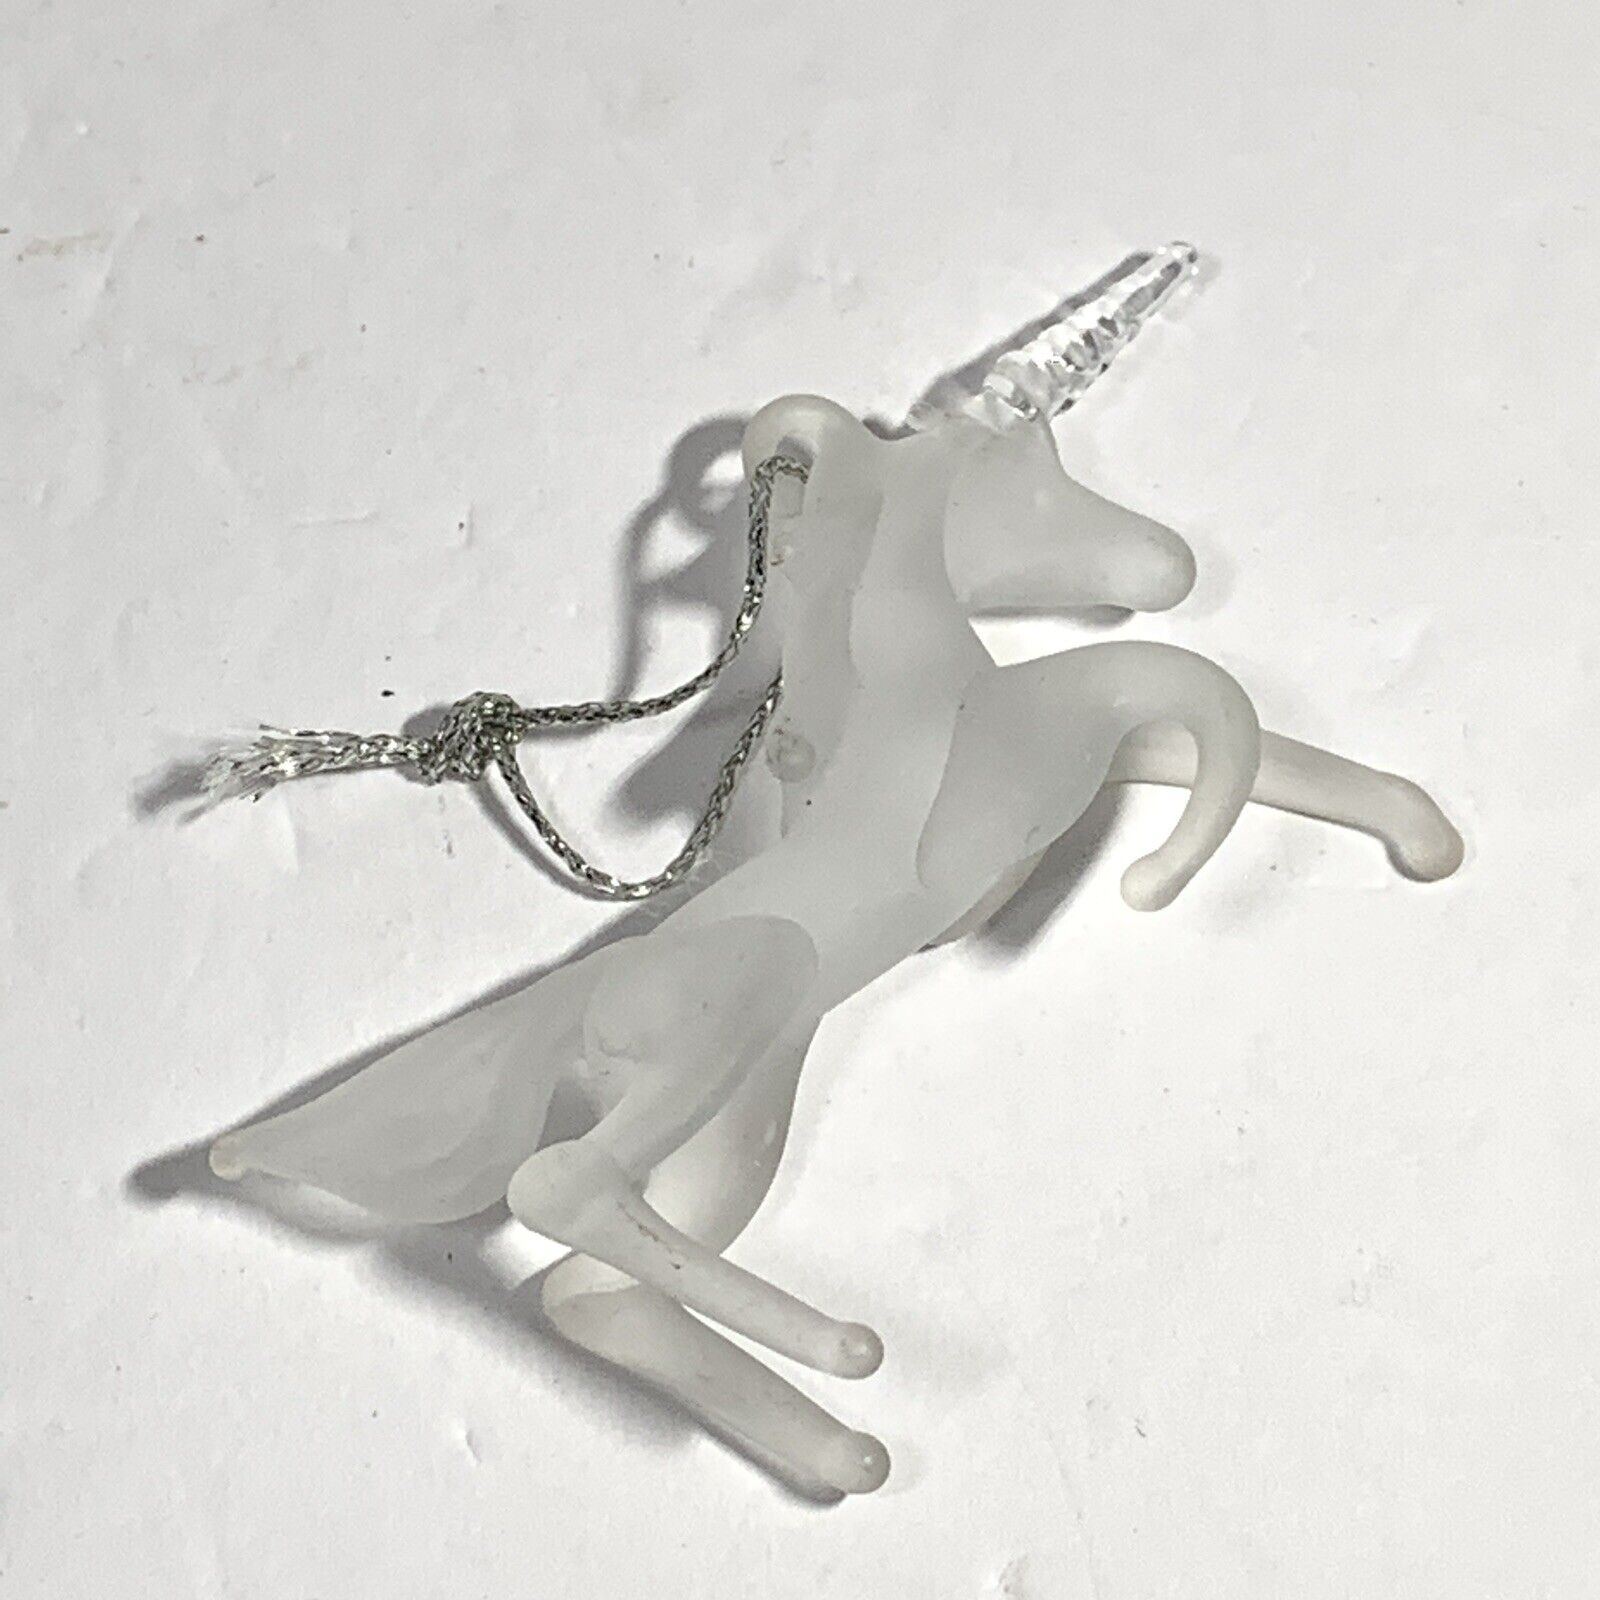 VTG Frosted Lucite UNICORN Christmas Ornament UPRIGHT REARING